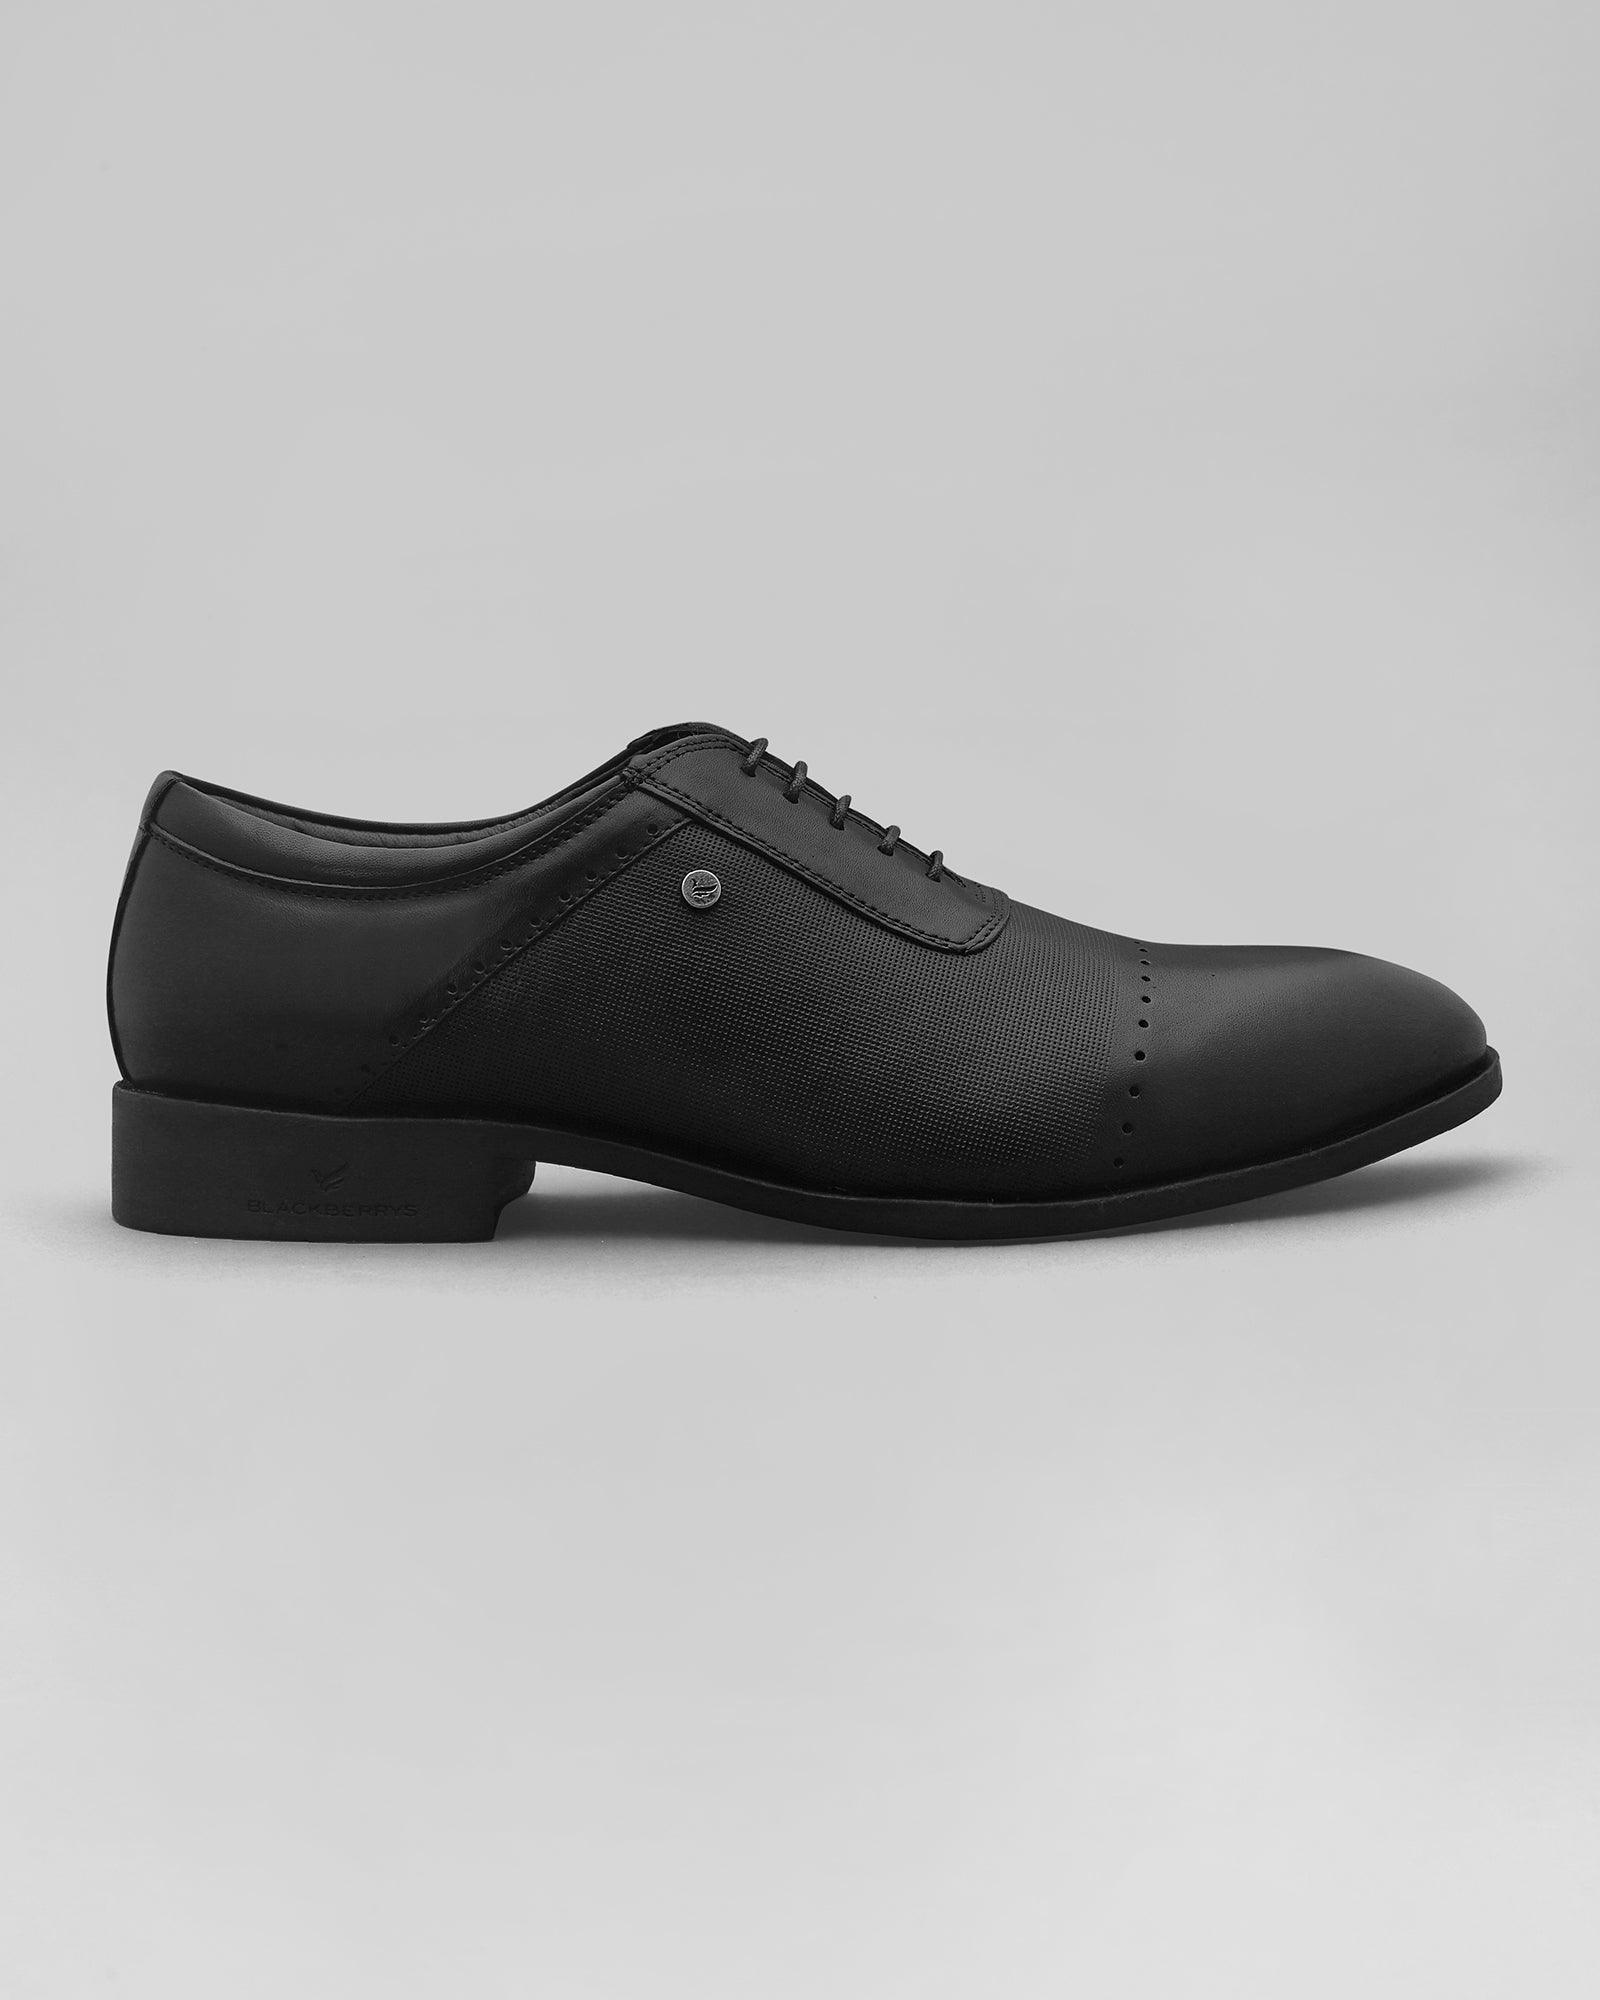 Must Haves Leather Black Textured Oxford Shoes - Kiwi